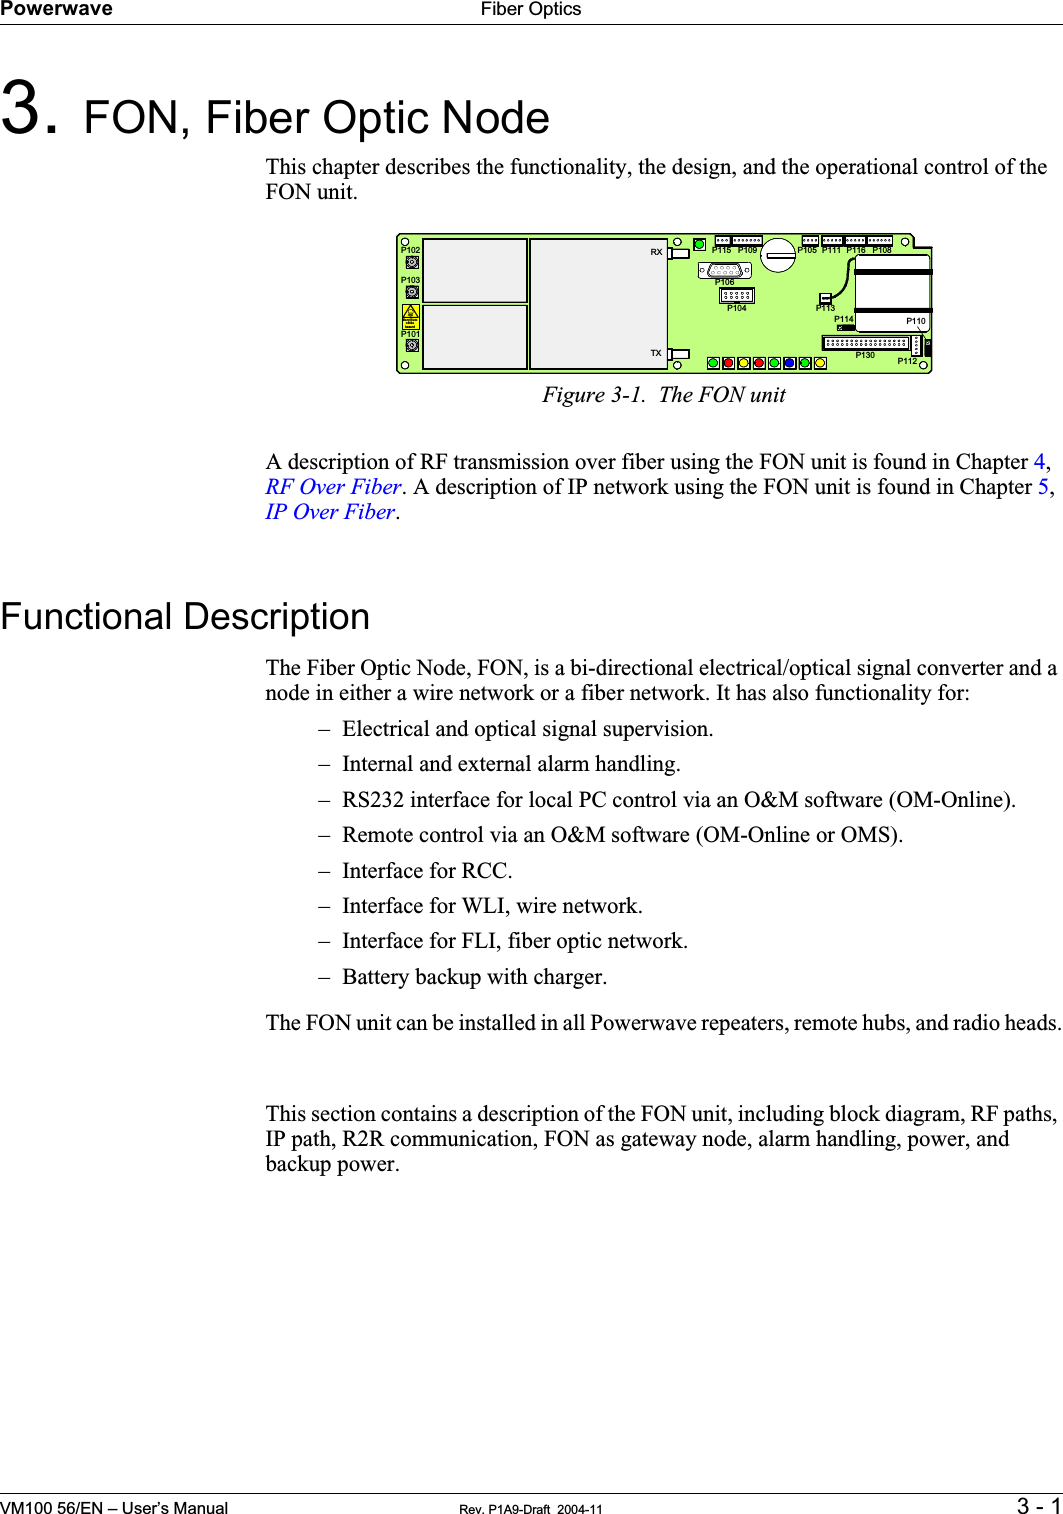 Powerwave Fiber OpticsVM100 56/EN – User’s Manual Rev. P1A9-Draft  2004-11 3 - 13. FON, Fiber Optic Node    This chapter describes the functionality, the design, and the operational control of the FON unit.Figure 3-1.  The FON unitA description of RF transmission over fiber using the FON unit is found in Chapter 4,RF Over Fiber. A description of IP network using the FON unit is found in Chapter 5,IP Over Fiber.Functional DescriptionThe Fiber Optic Node, FON, is a bi-directional electrical/optical signal converter and a node in either a wire network or a fiber network. It has also functionality for:– Electrical and optical signal supervision.– Internal and external alarm handling.– RS232 interface for local PC control via an O&amp;M software (OM-Online).– Remote control via an O&amp;M software (OM-Online or OMS).– Interface for RCC.– Interface for WLI, wire network.– Interface for FLI, fiber optic network.– Battery backup with charger.The FON unit can be installed in all Powerwave repeaters, remote hubs, and radio heads.This section contains a description of the FON unit, including block diagram, RF paths, IP path, R2R communication, FON as gateway node, alarm handling, power, and backup power.P102P130BerylliumoxidehazardP103P101P114P108P116P111P105P109P115P106P104RXTXP113P112P110